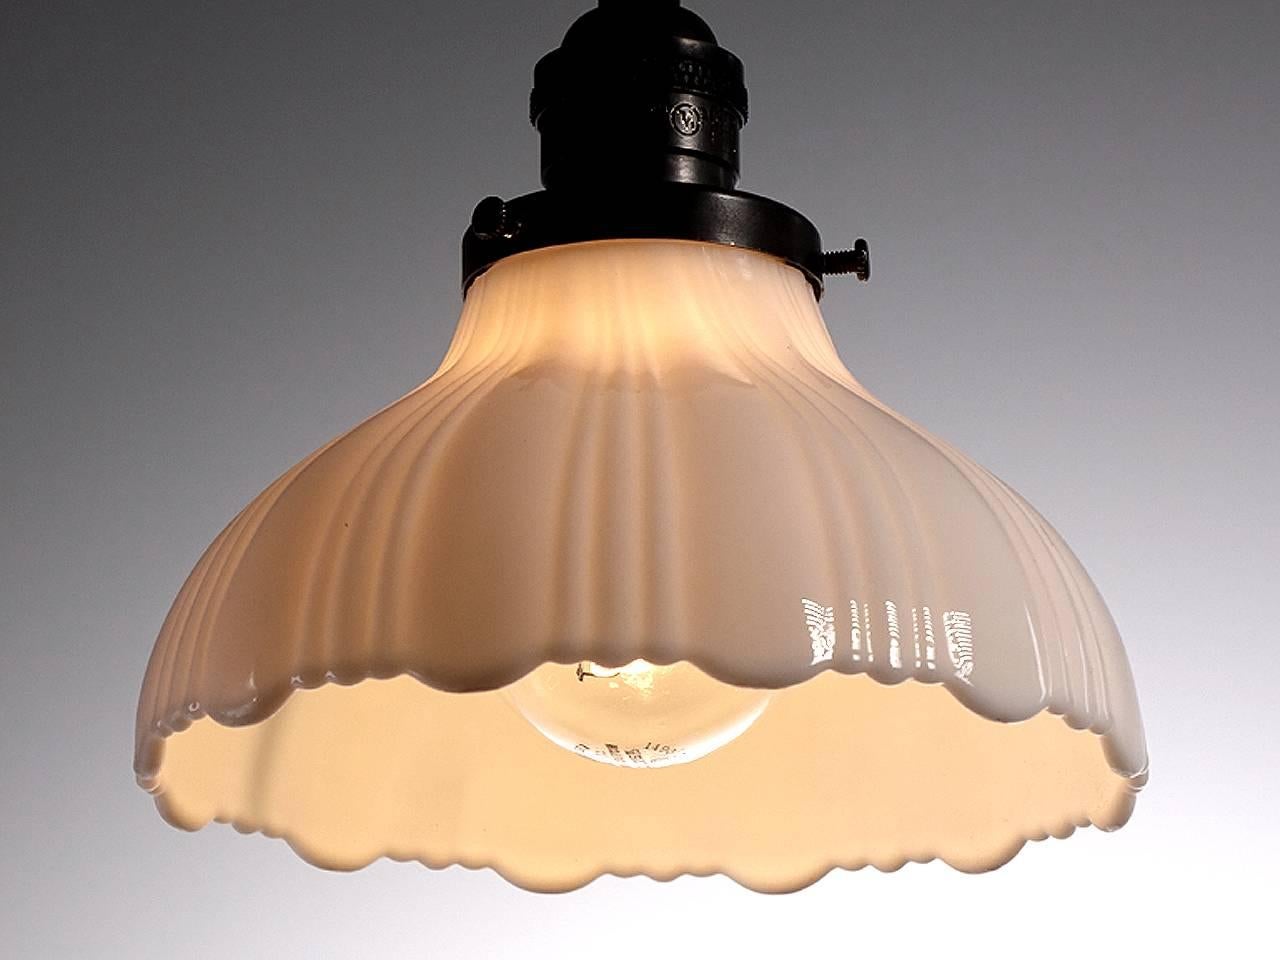 Softly curved bell shaped pendants are a Classic. They feel at home with any style decor. This example is an extra heavy thick-thin pattern in cast milk glass with a scalloped edge. The pattern has three thin ribs and one wide. The lamps are priced